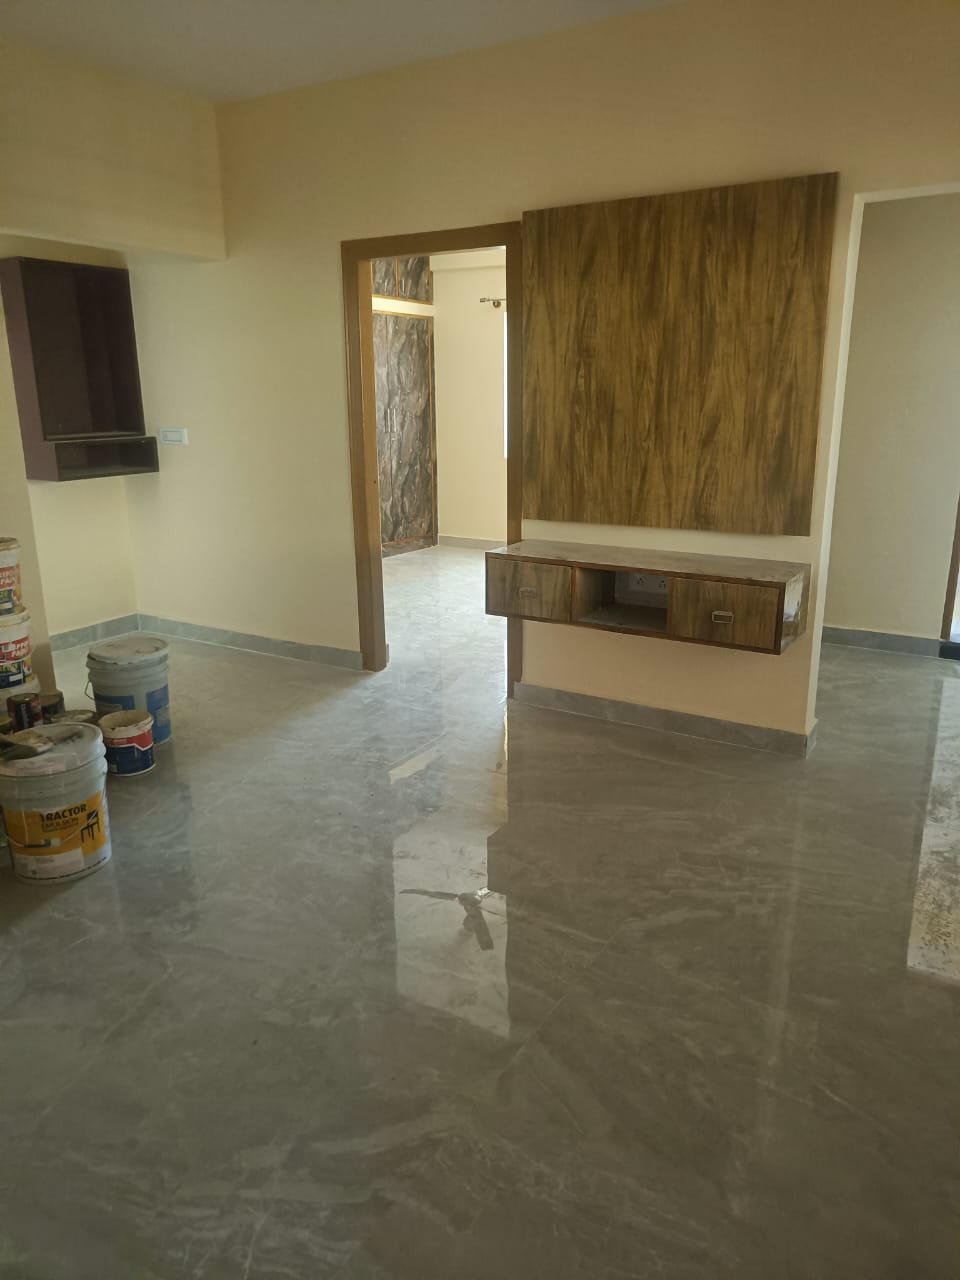 3 BHK Independent House for Lease Only at JAML2 - 5102-28lakh in Raghavendra Nagar